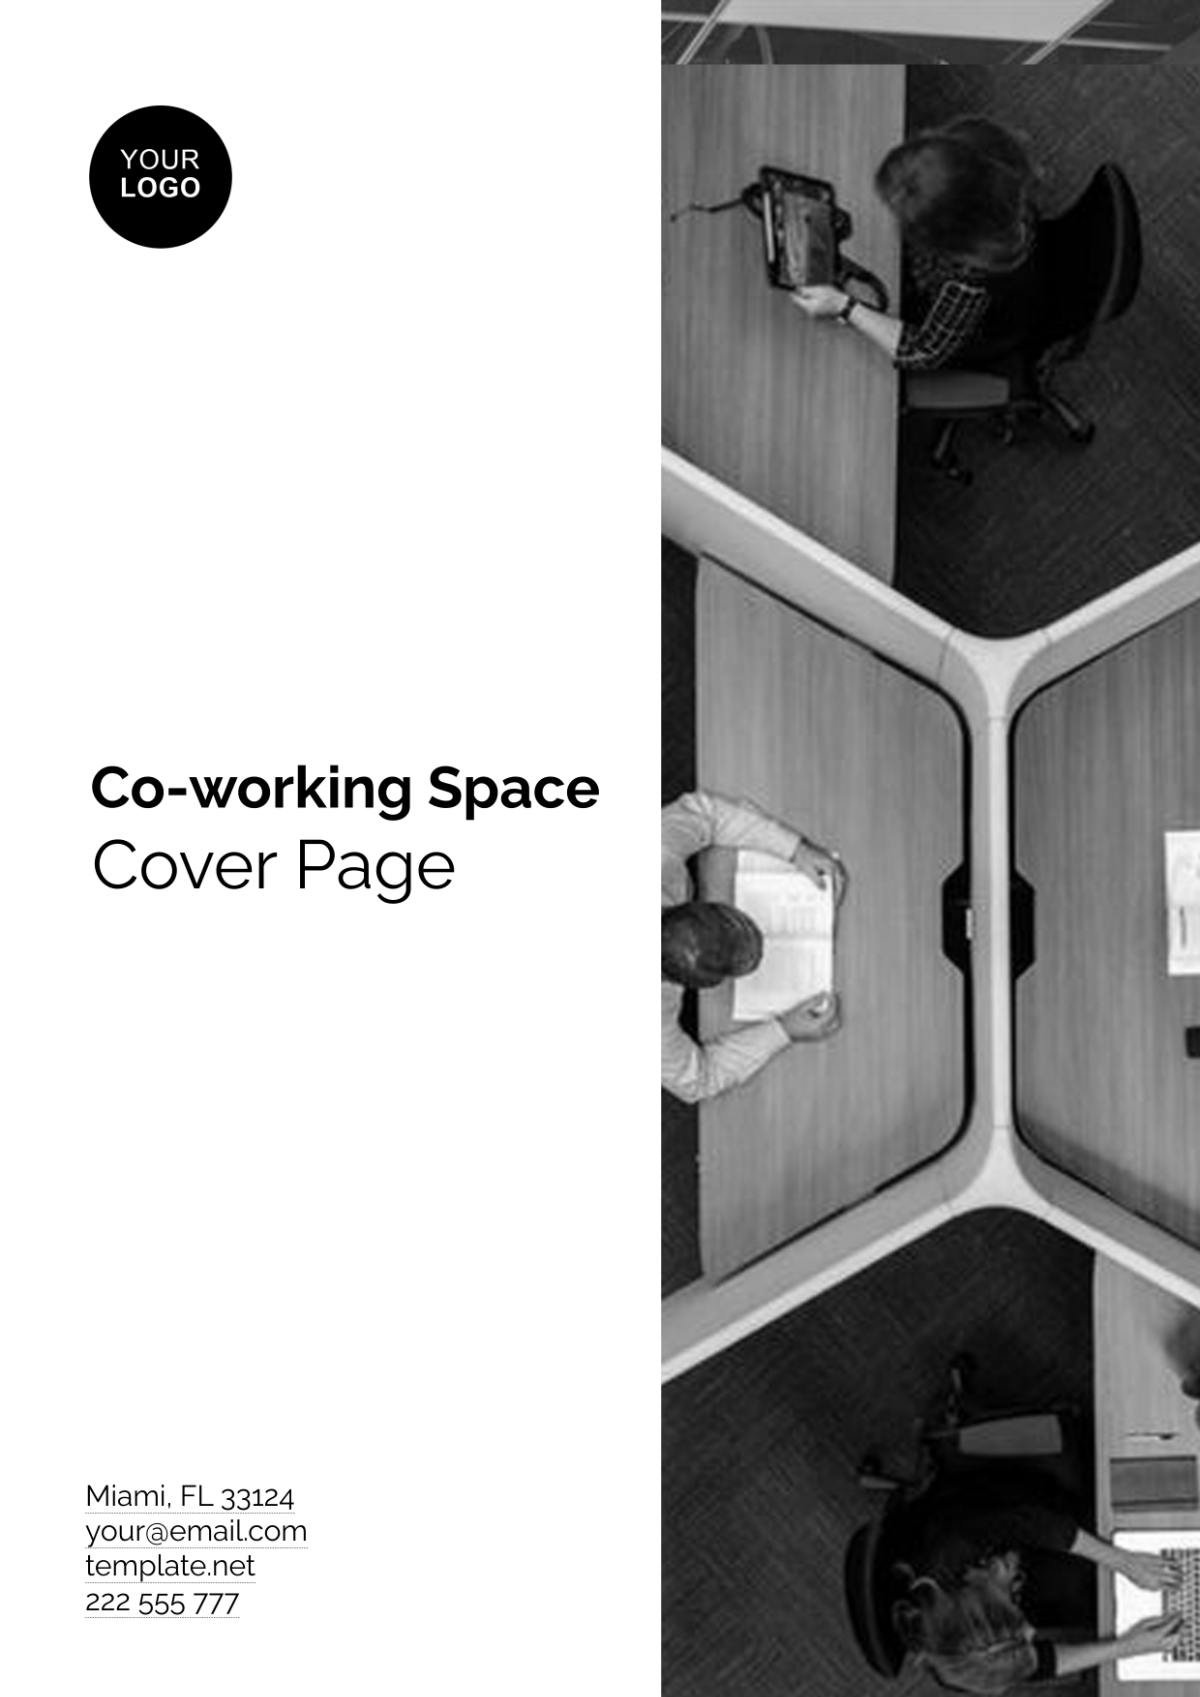 Co-working Space Cover Page Address